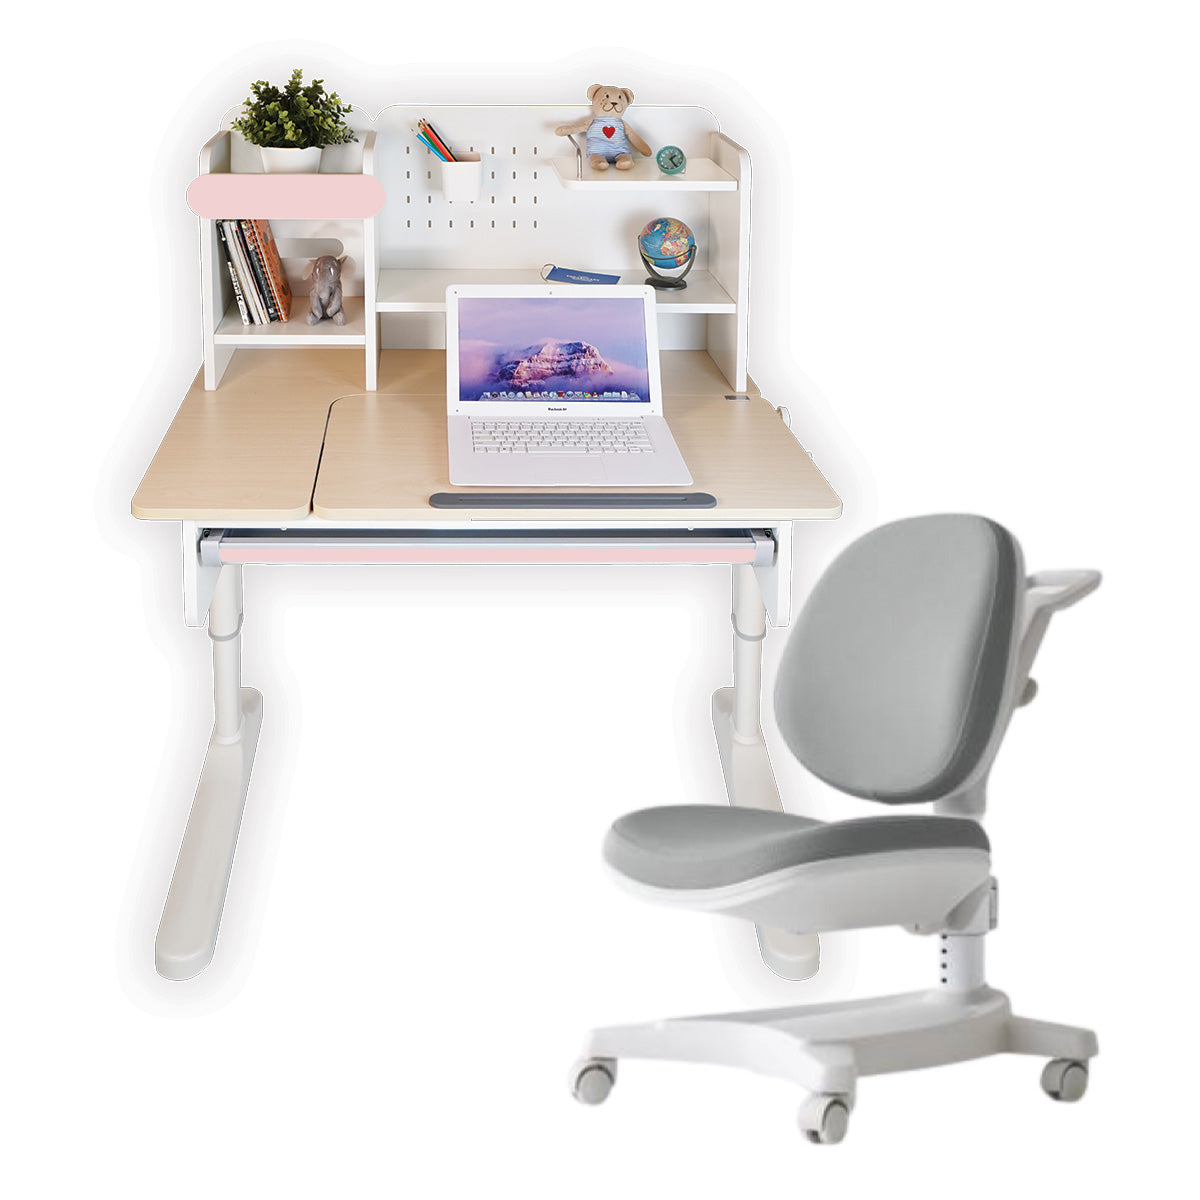 Impact Ergo-Growing Study Desk And Chair Set 1000mm x 650mm, IM-G1000A-PK (Ready Stocks)